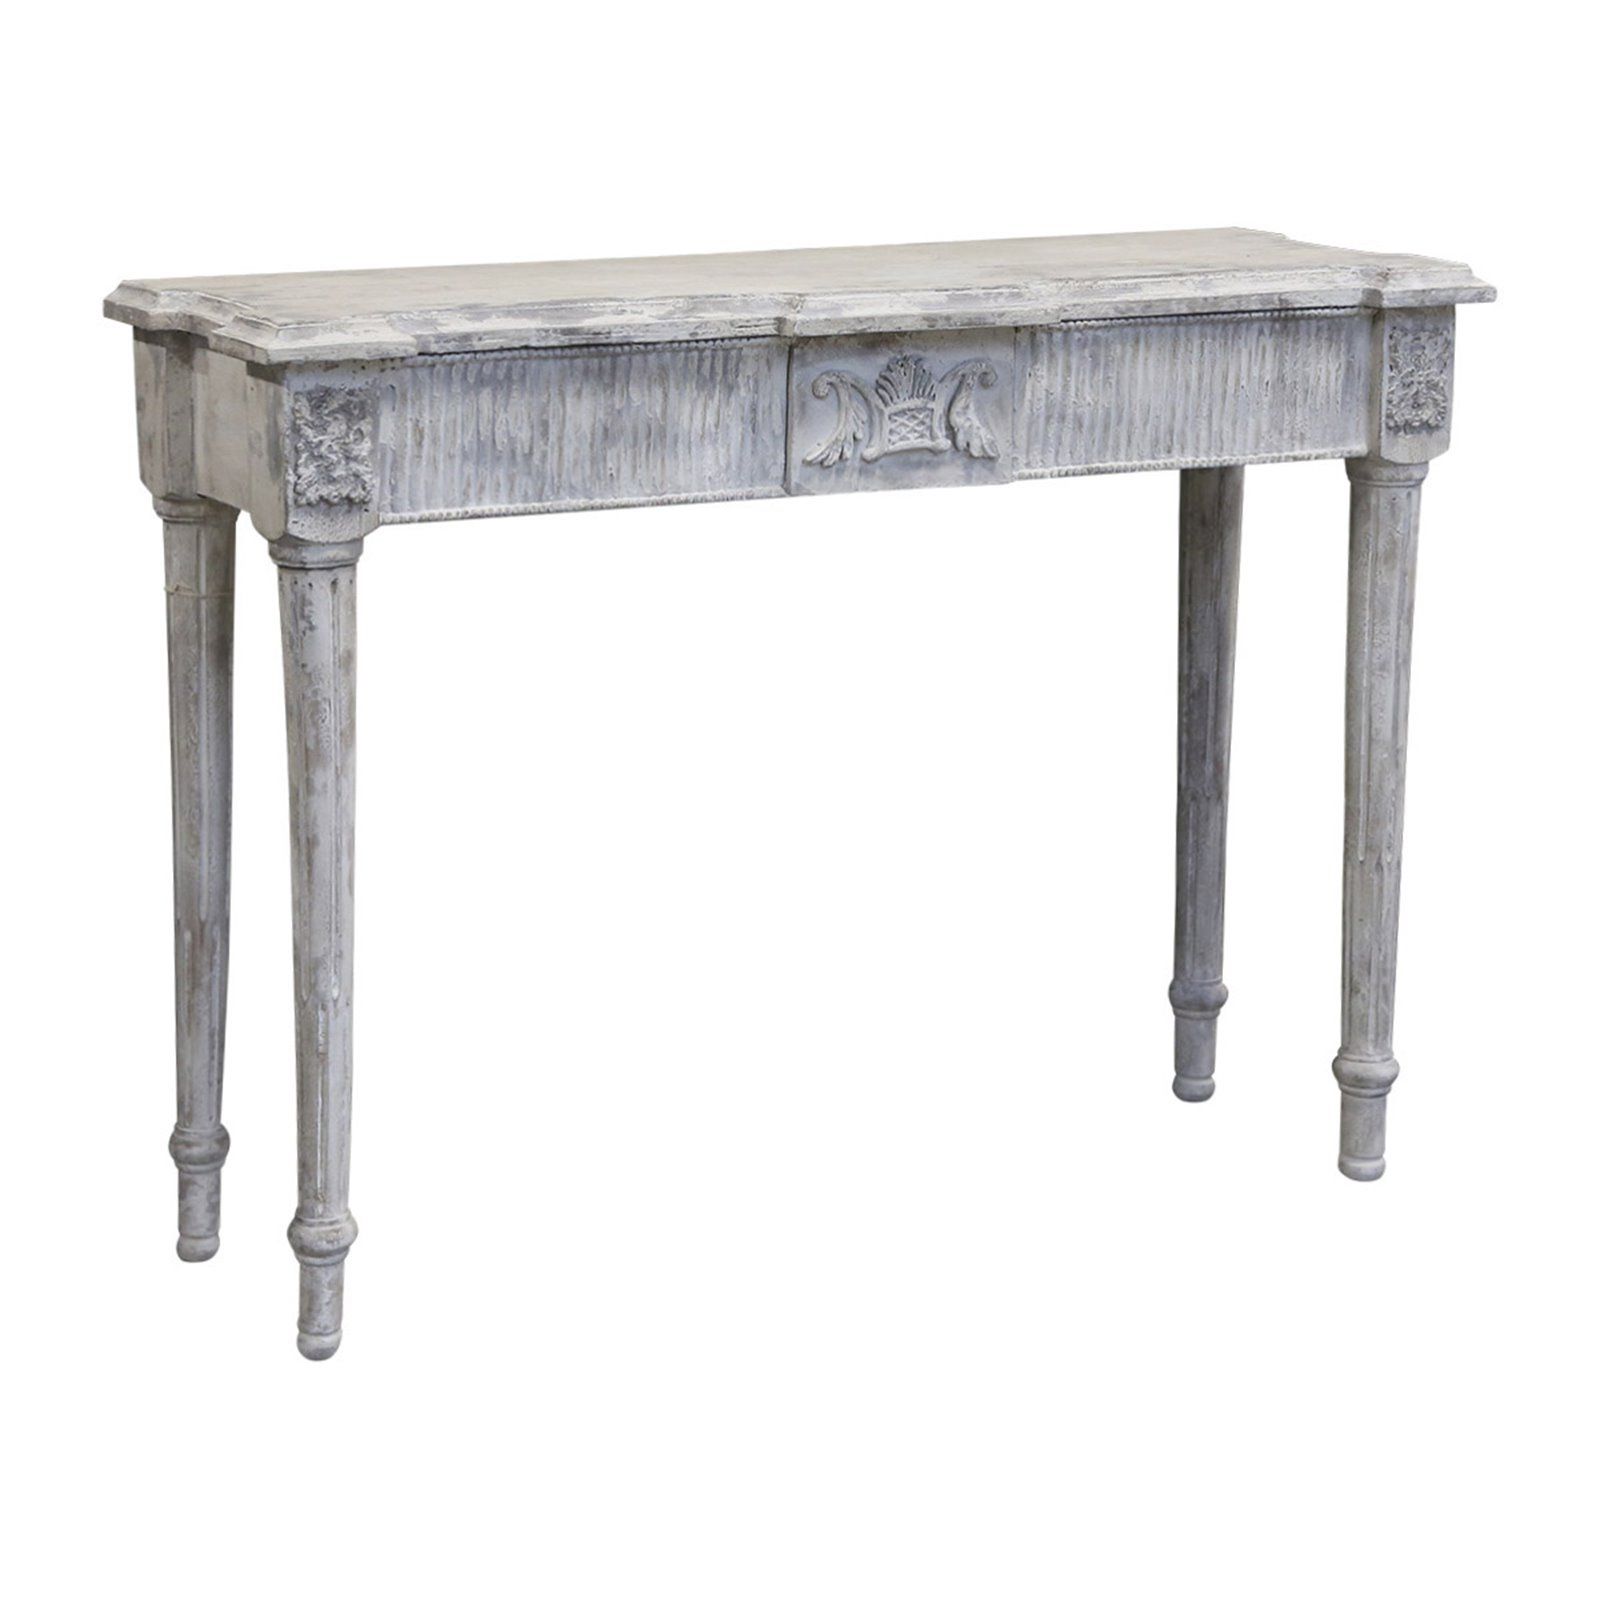 Vintage White Washed Console Table Inside Best And Newest Geometric White Console Tables (View 10 of 10)